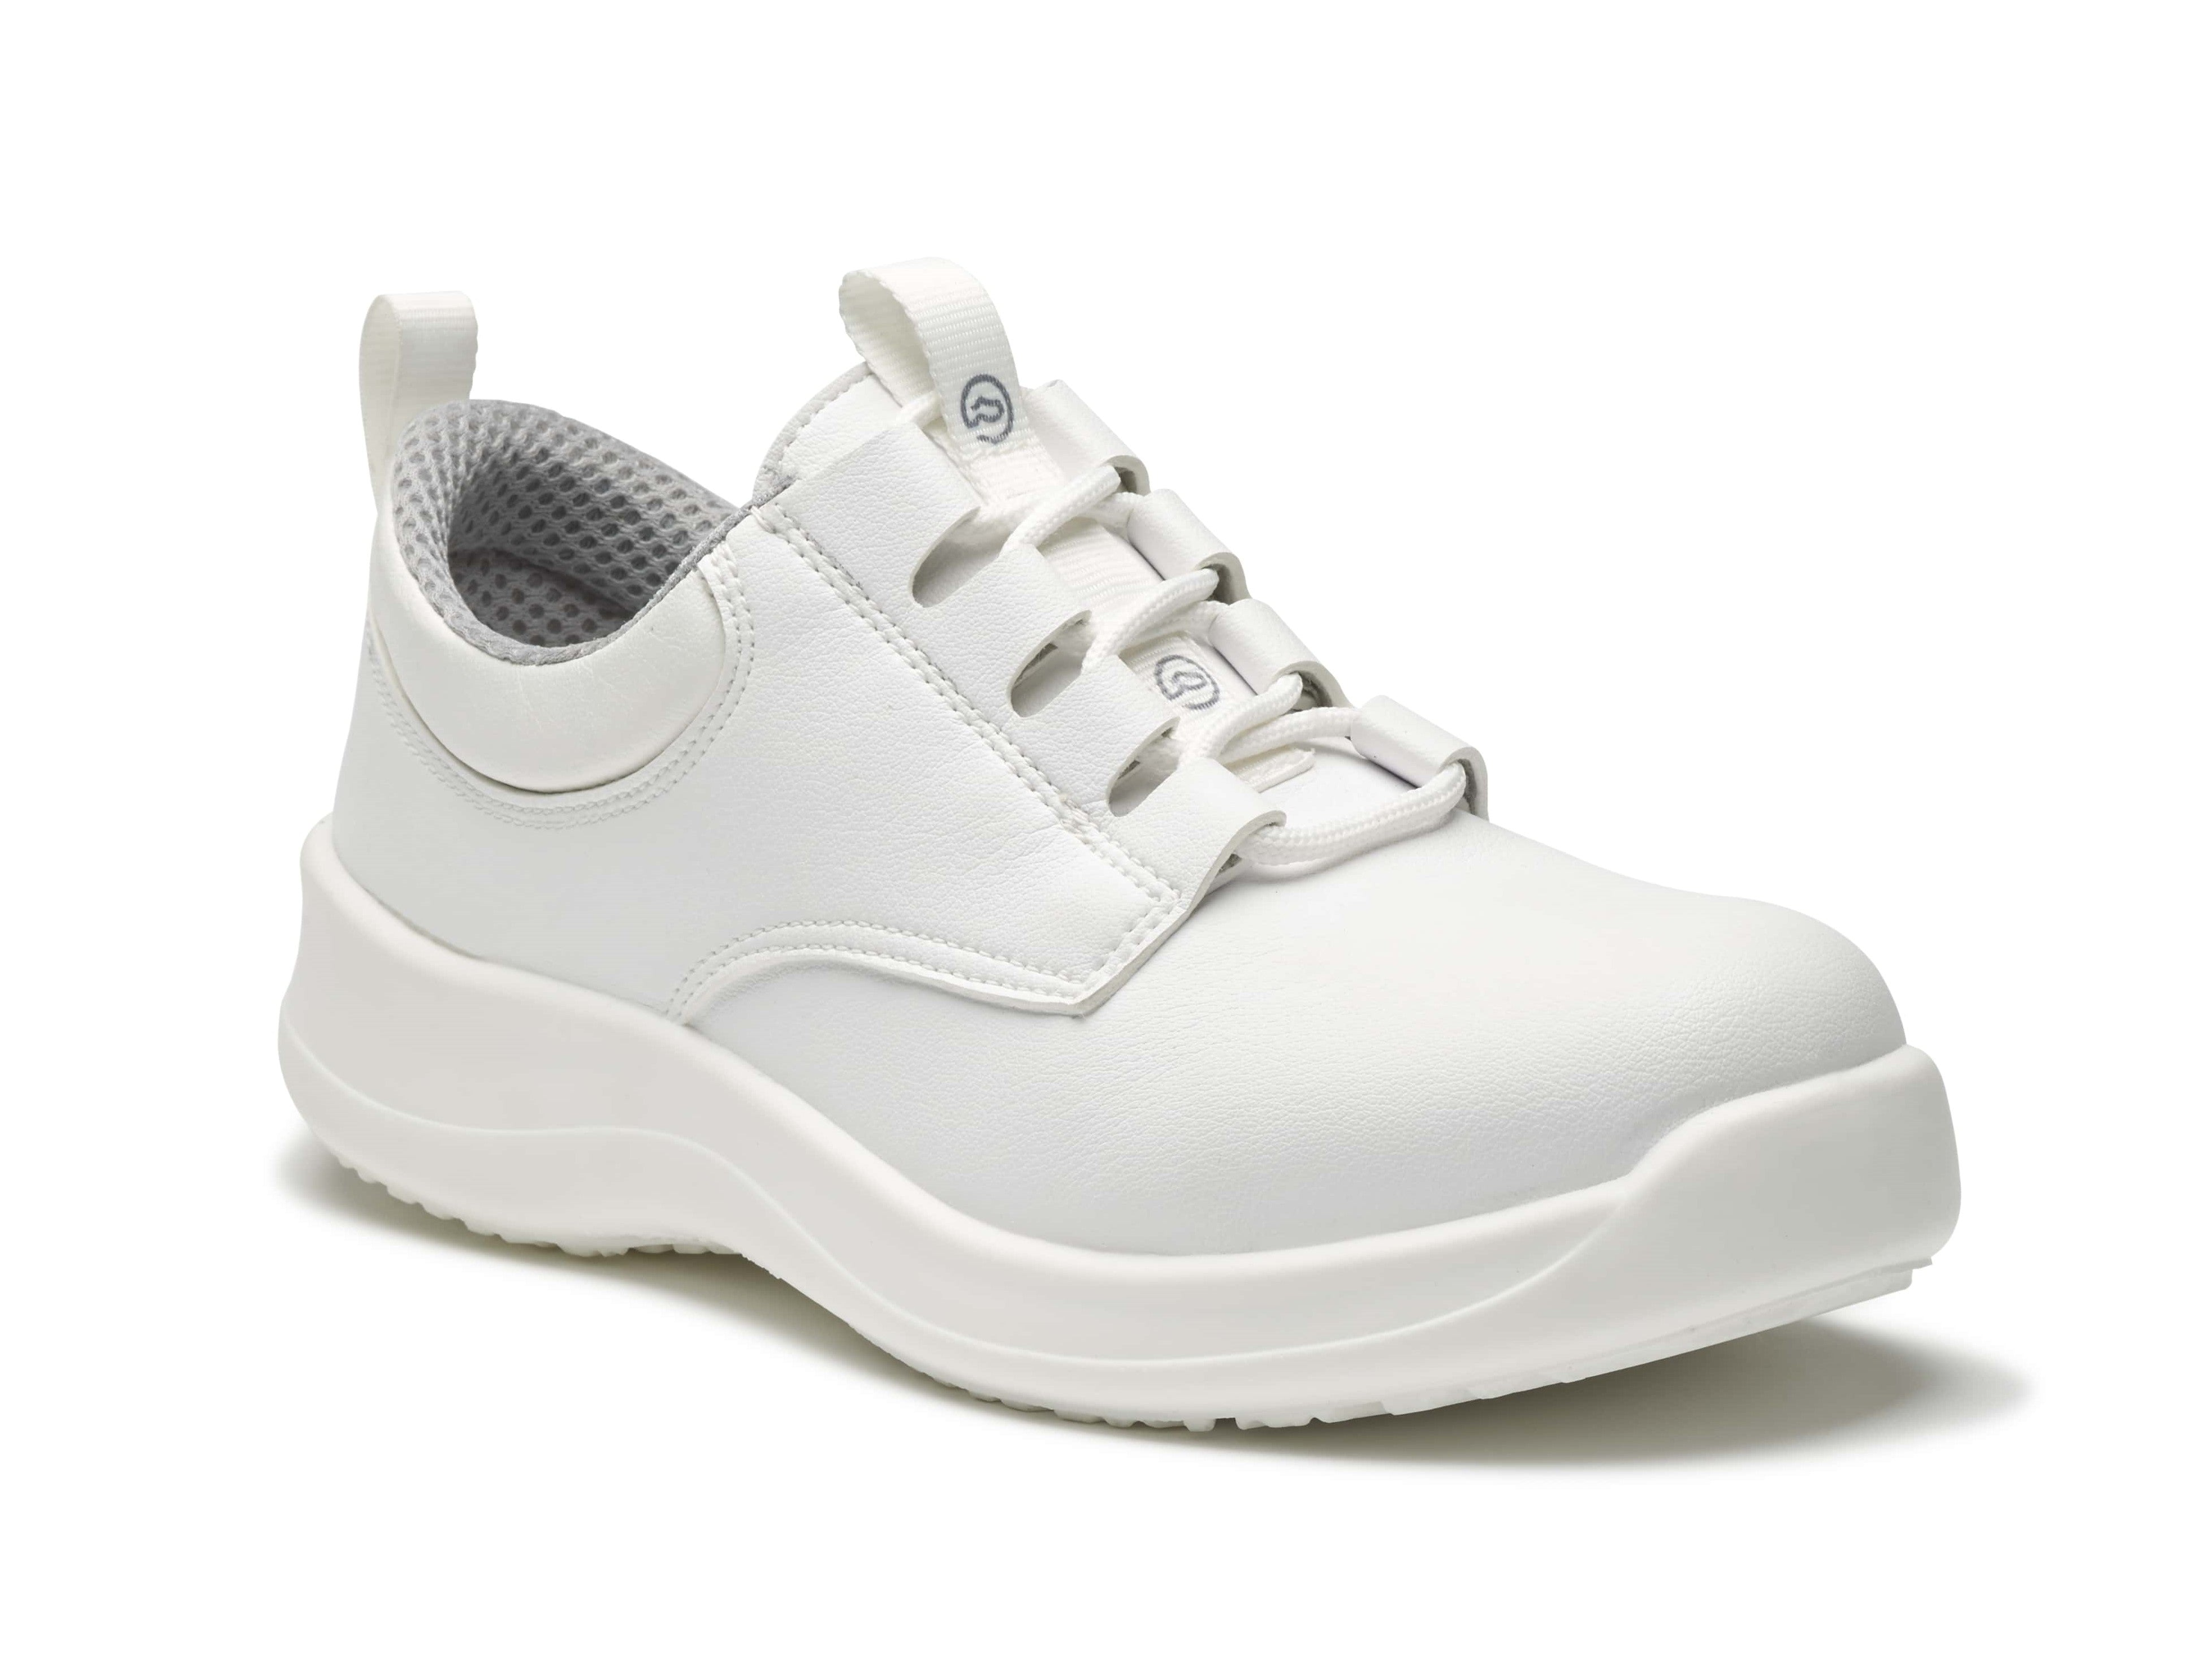 An image of Toffeln SafetyLite (lace up), White / 3